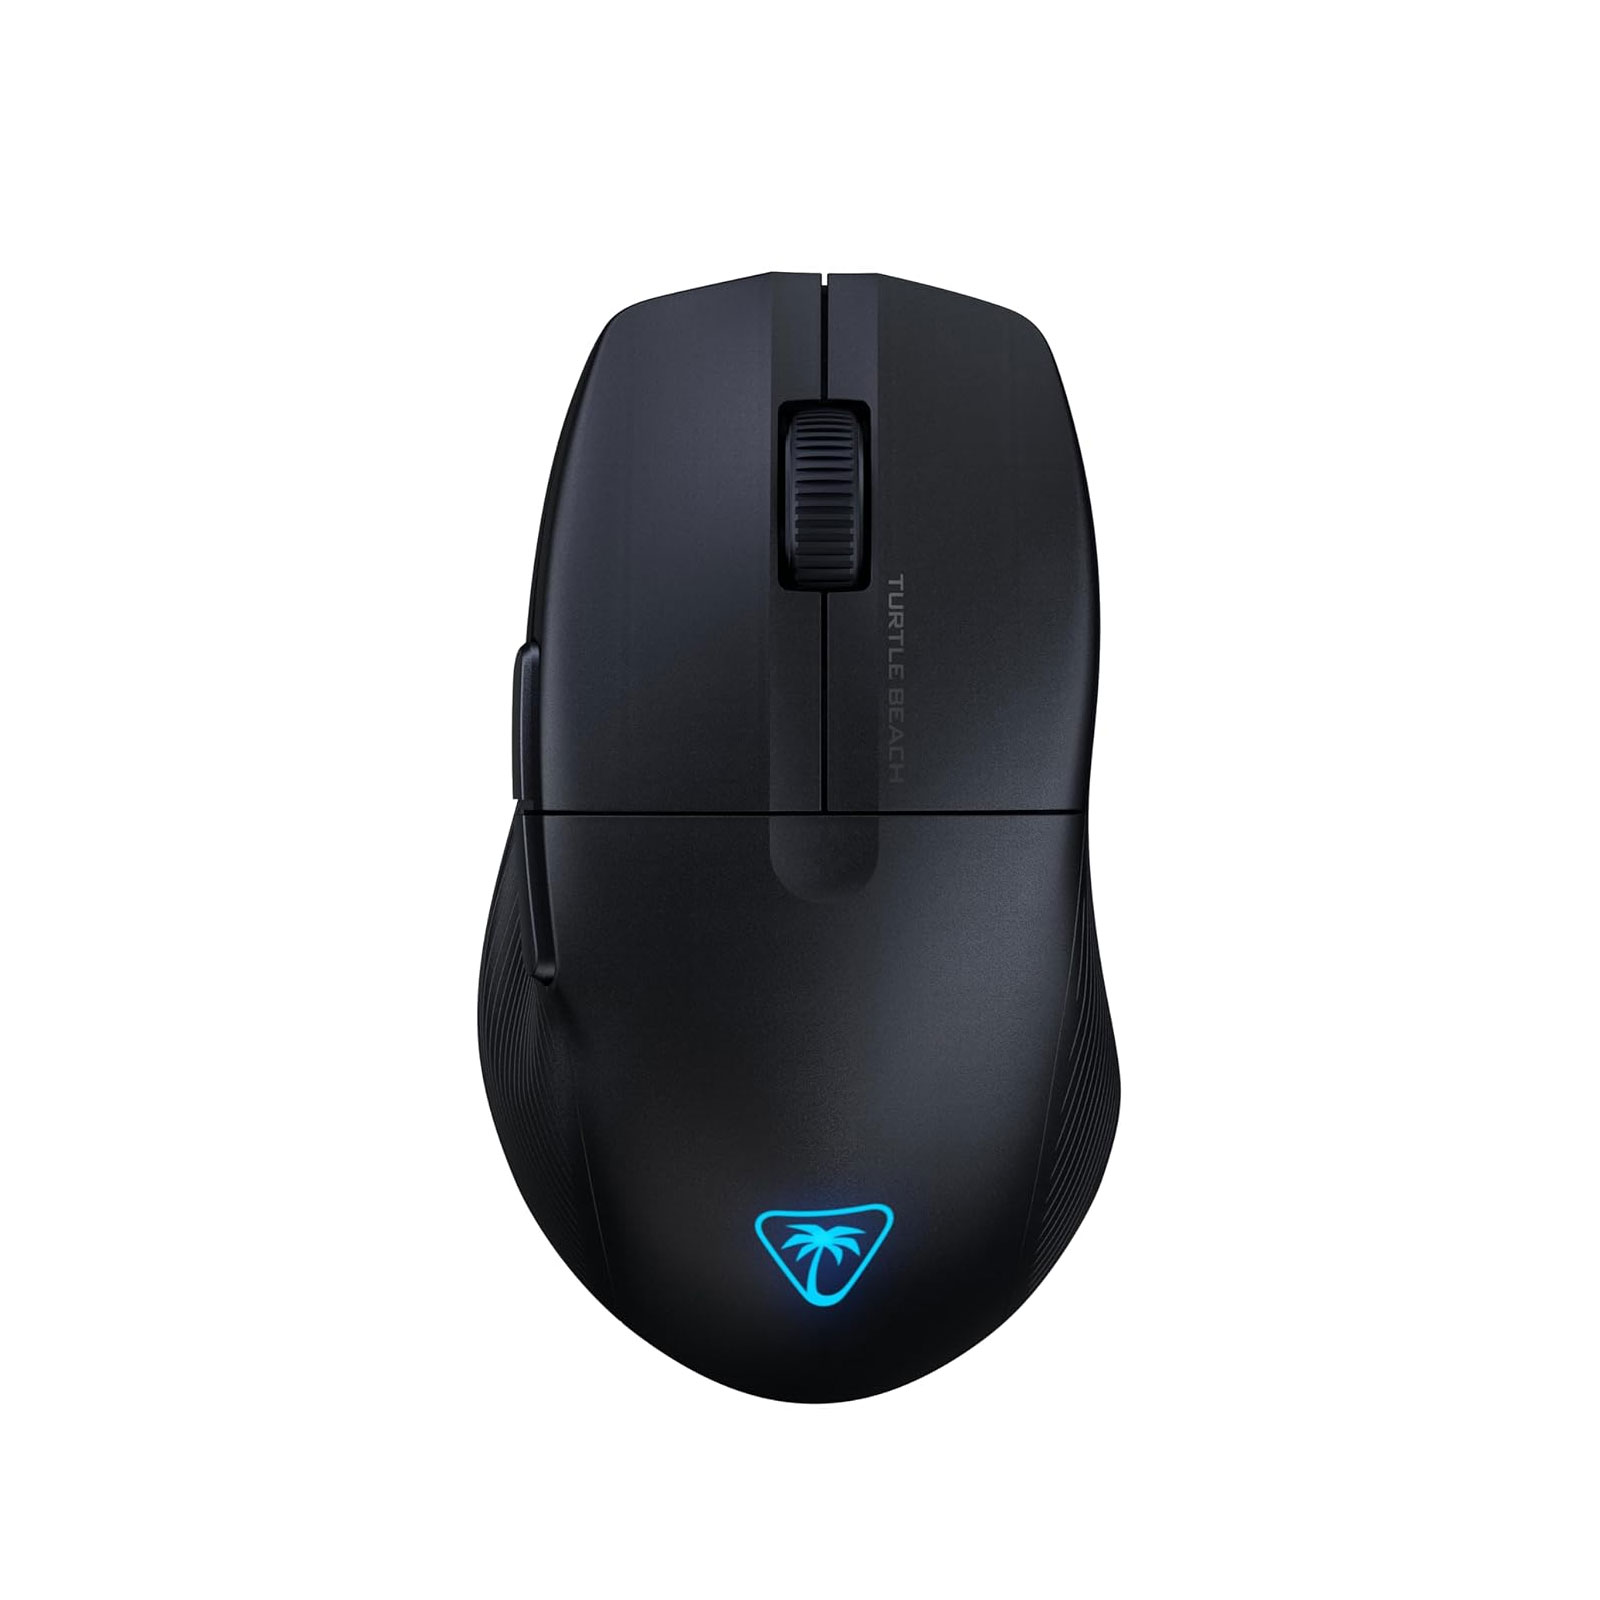 TB Mouse Pure Air Black